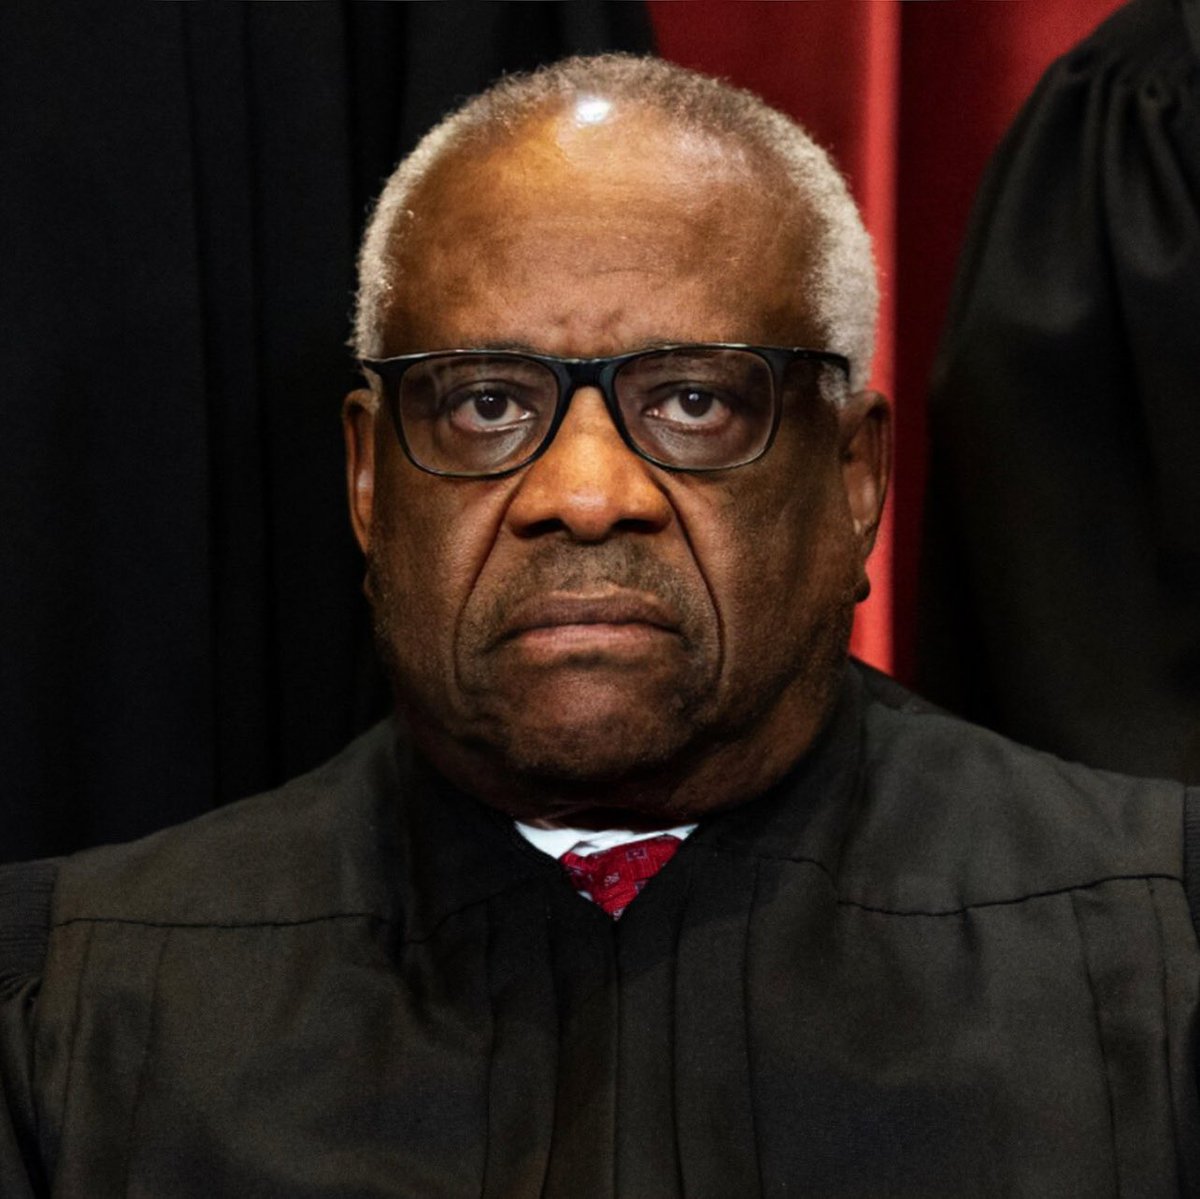 Clarence Thomas. You just voted to gut affirmative action and student loan forgiveness. Let’s take a look how you got into Yale, shall we? During your 58-page concurring opinion, you wrote that the foundational policies of affirmative action 'fly in the face of our